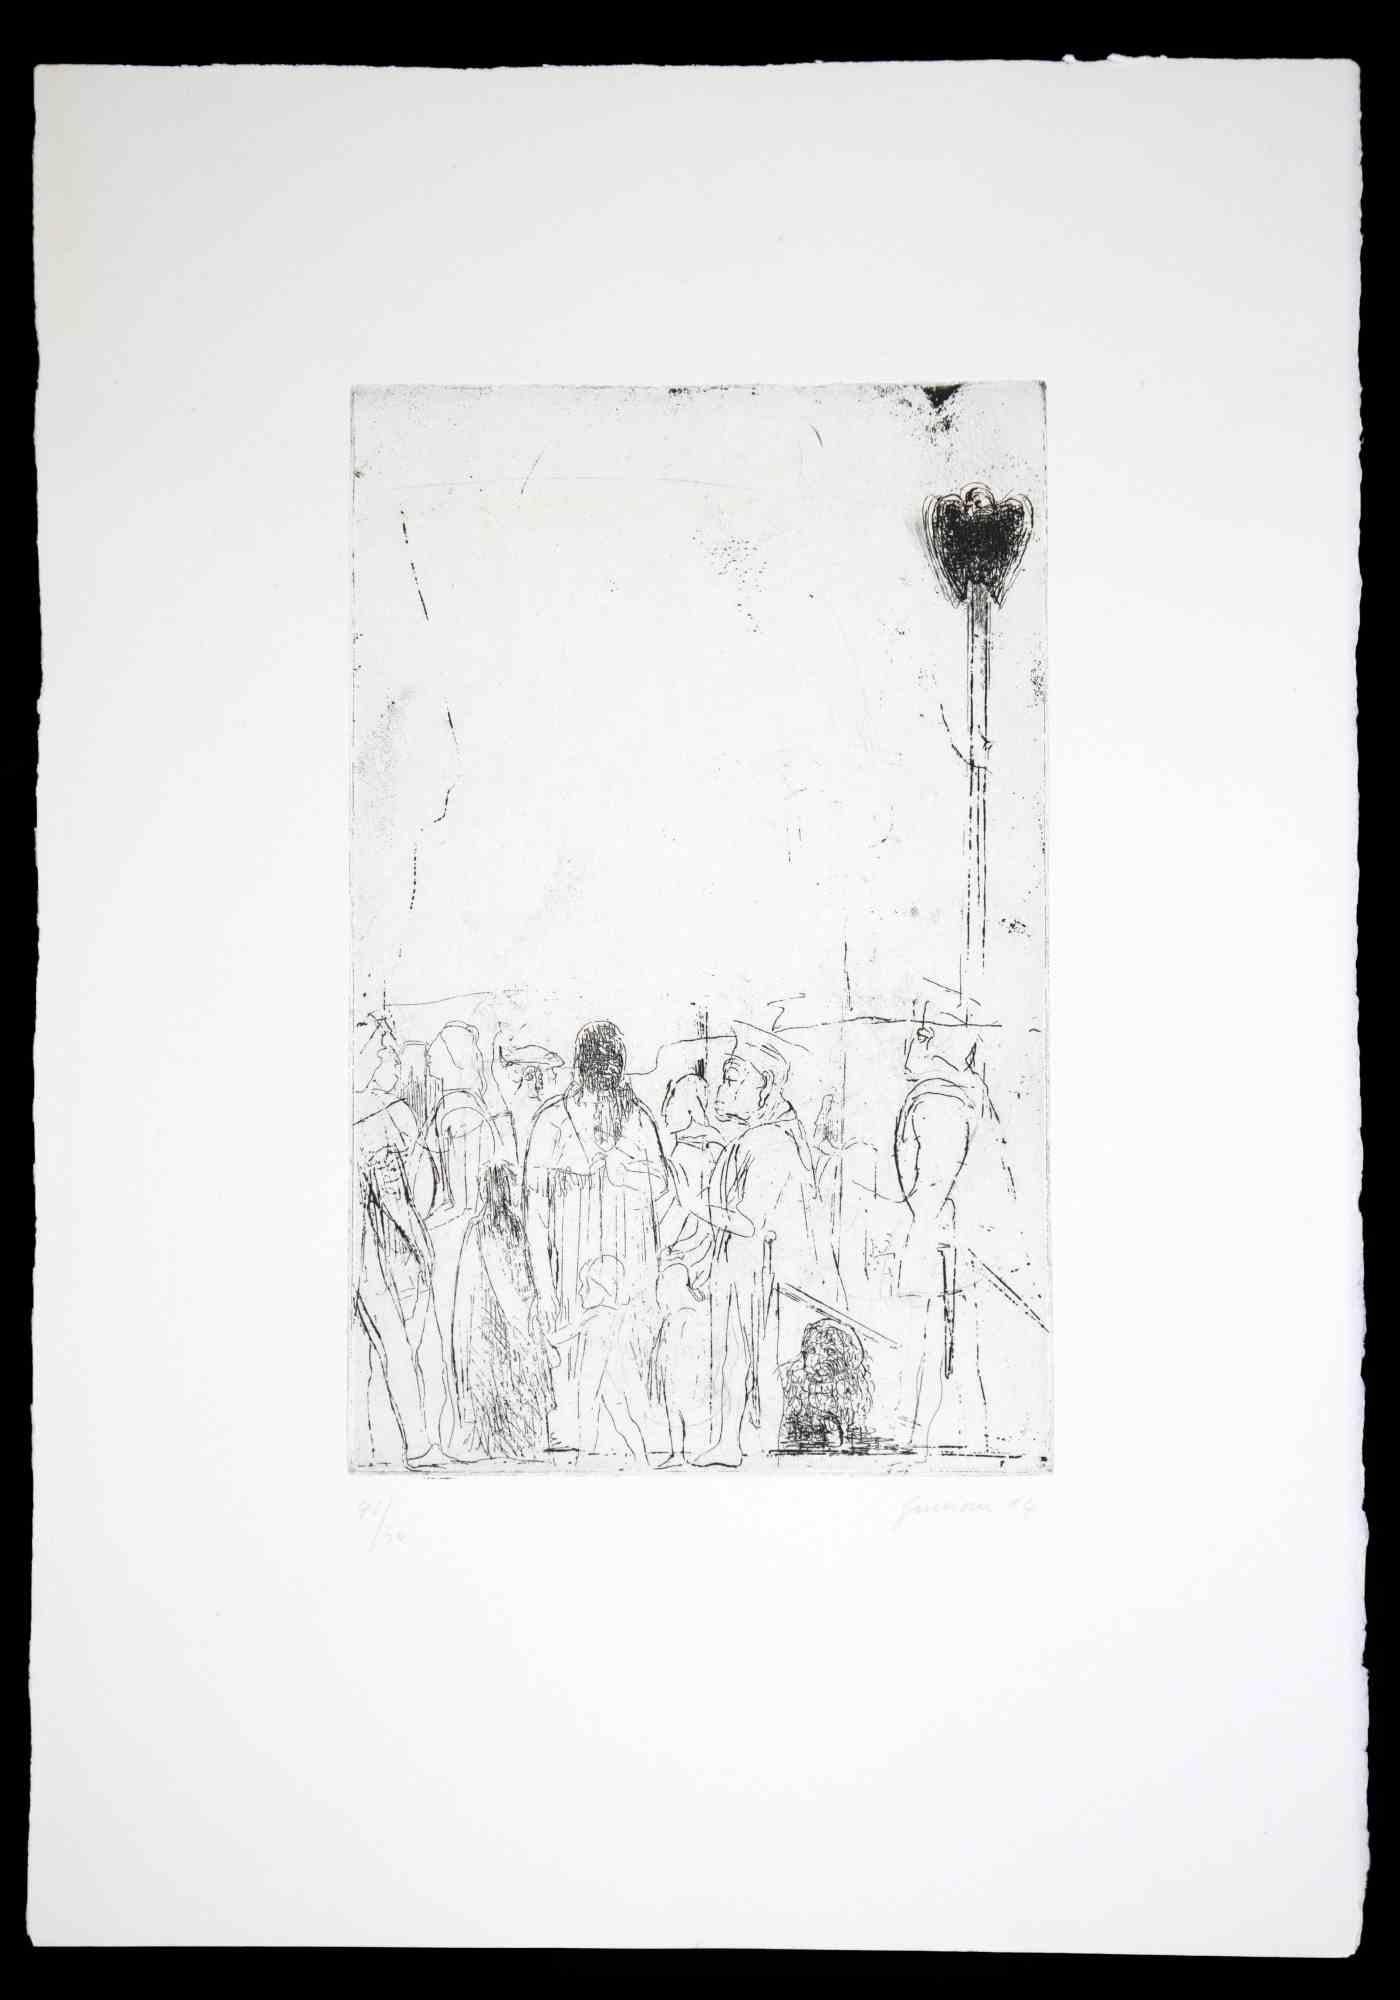 The Manifestation is an original Etching and Drypoint realized by Piero Guccione in 1964.

Hand-signed.

Numbered, 41/50.

The artwork is depicted through confident strokes in a well-balanced composition.